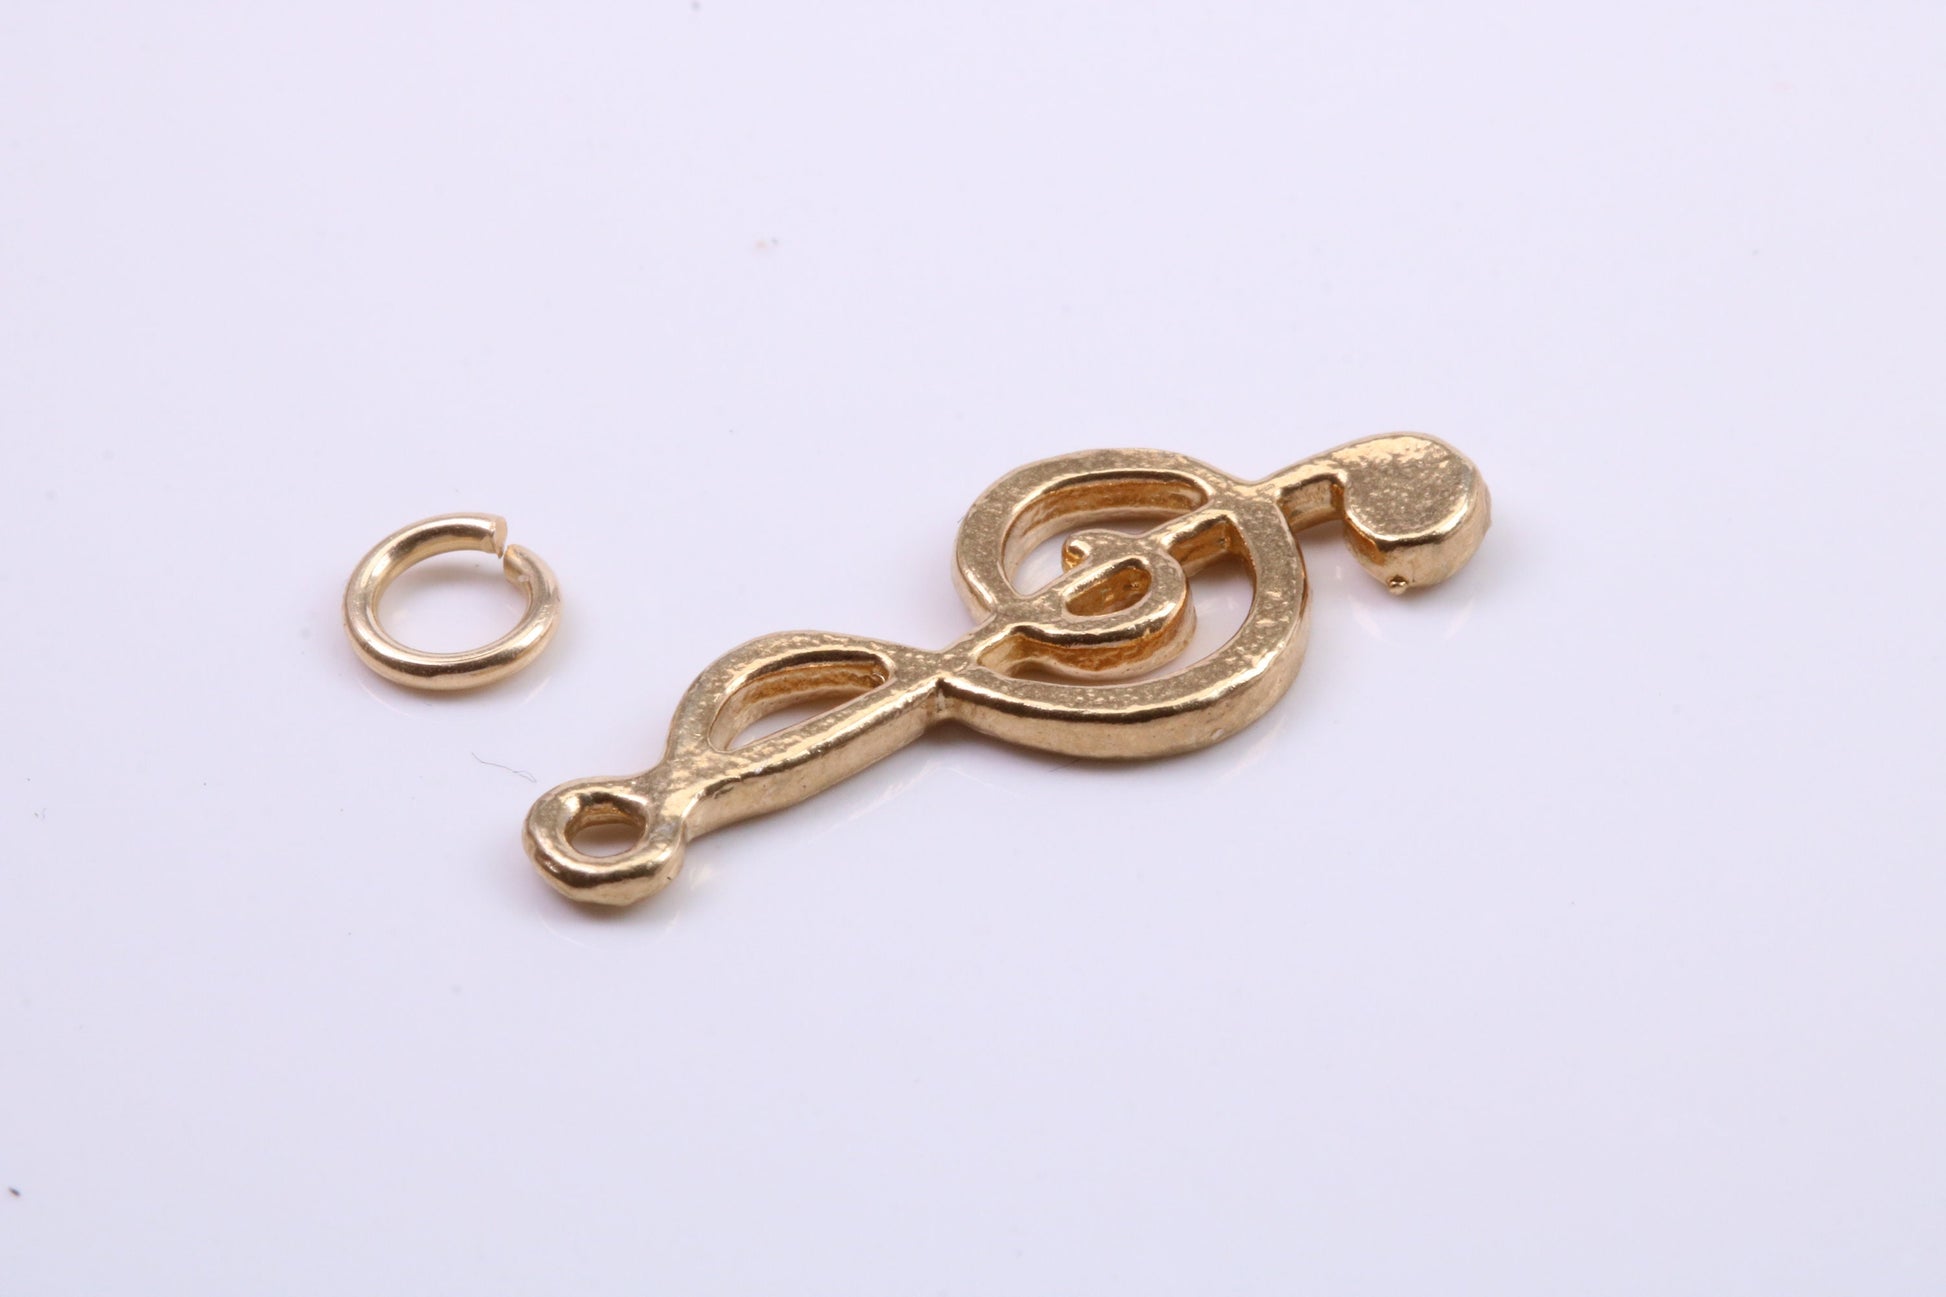 Musical Treble Clef Note Charm, Traditional Charm, Made from Solid 9ct Yellow Gold, British Hallmarked, Complete with Attachment Link